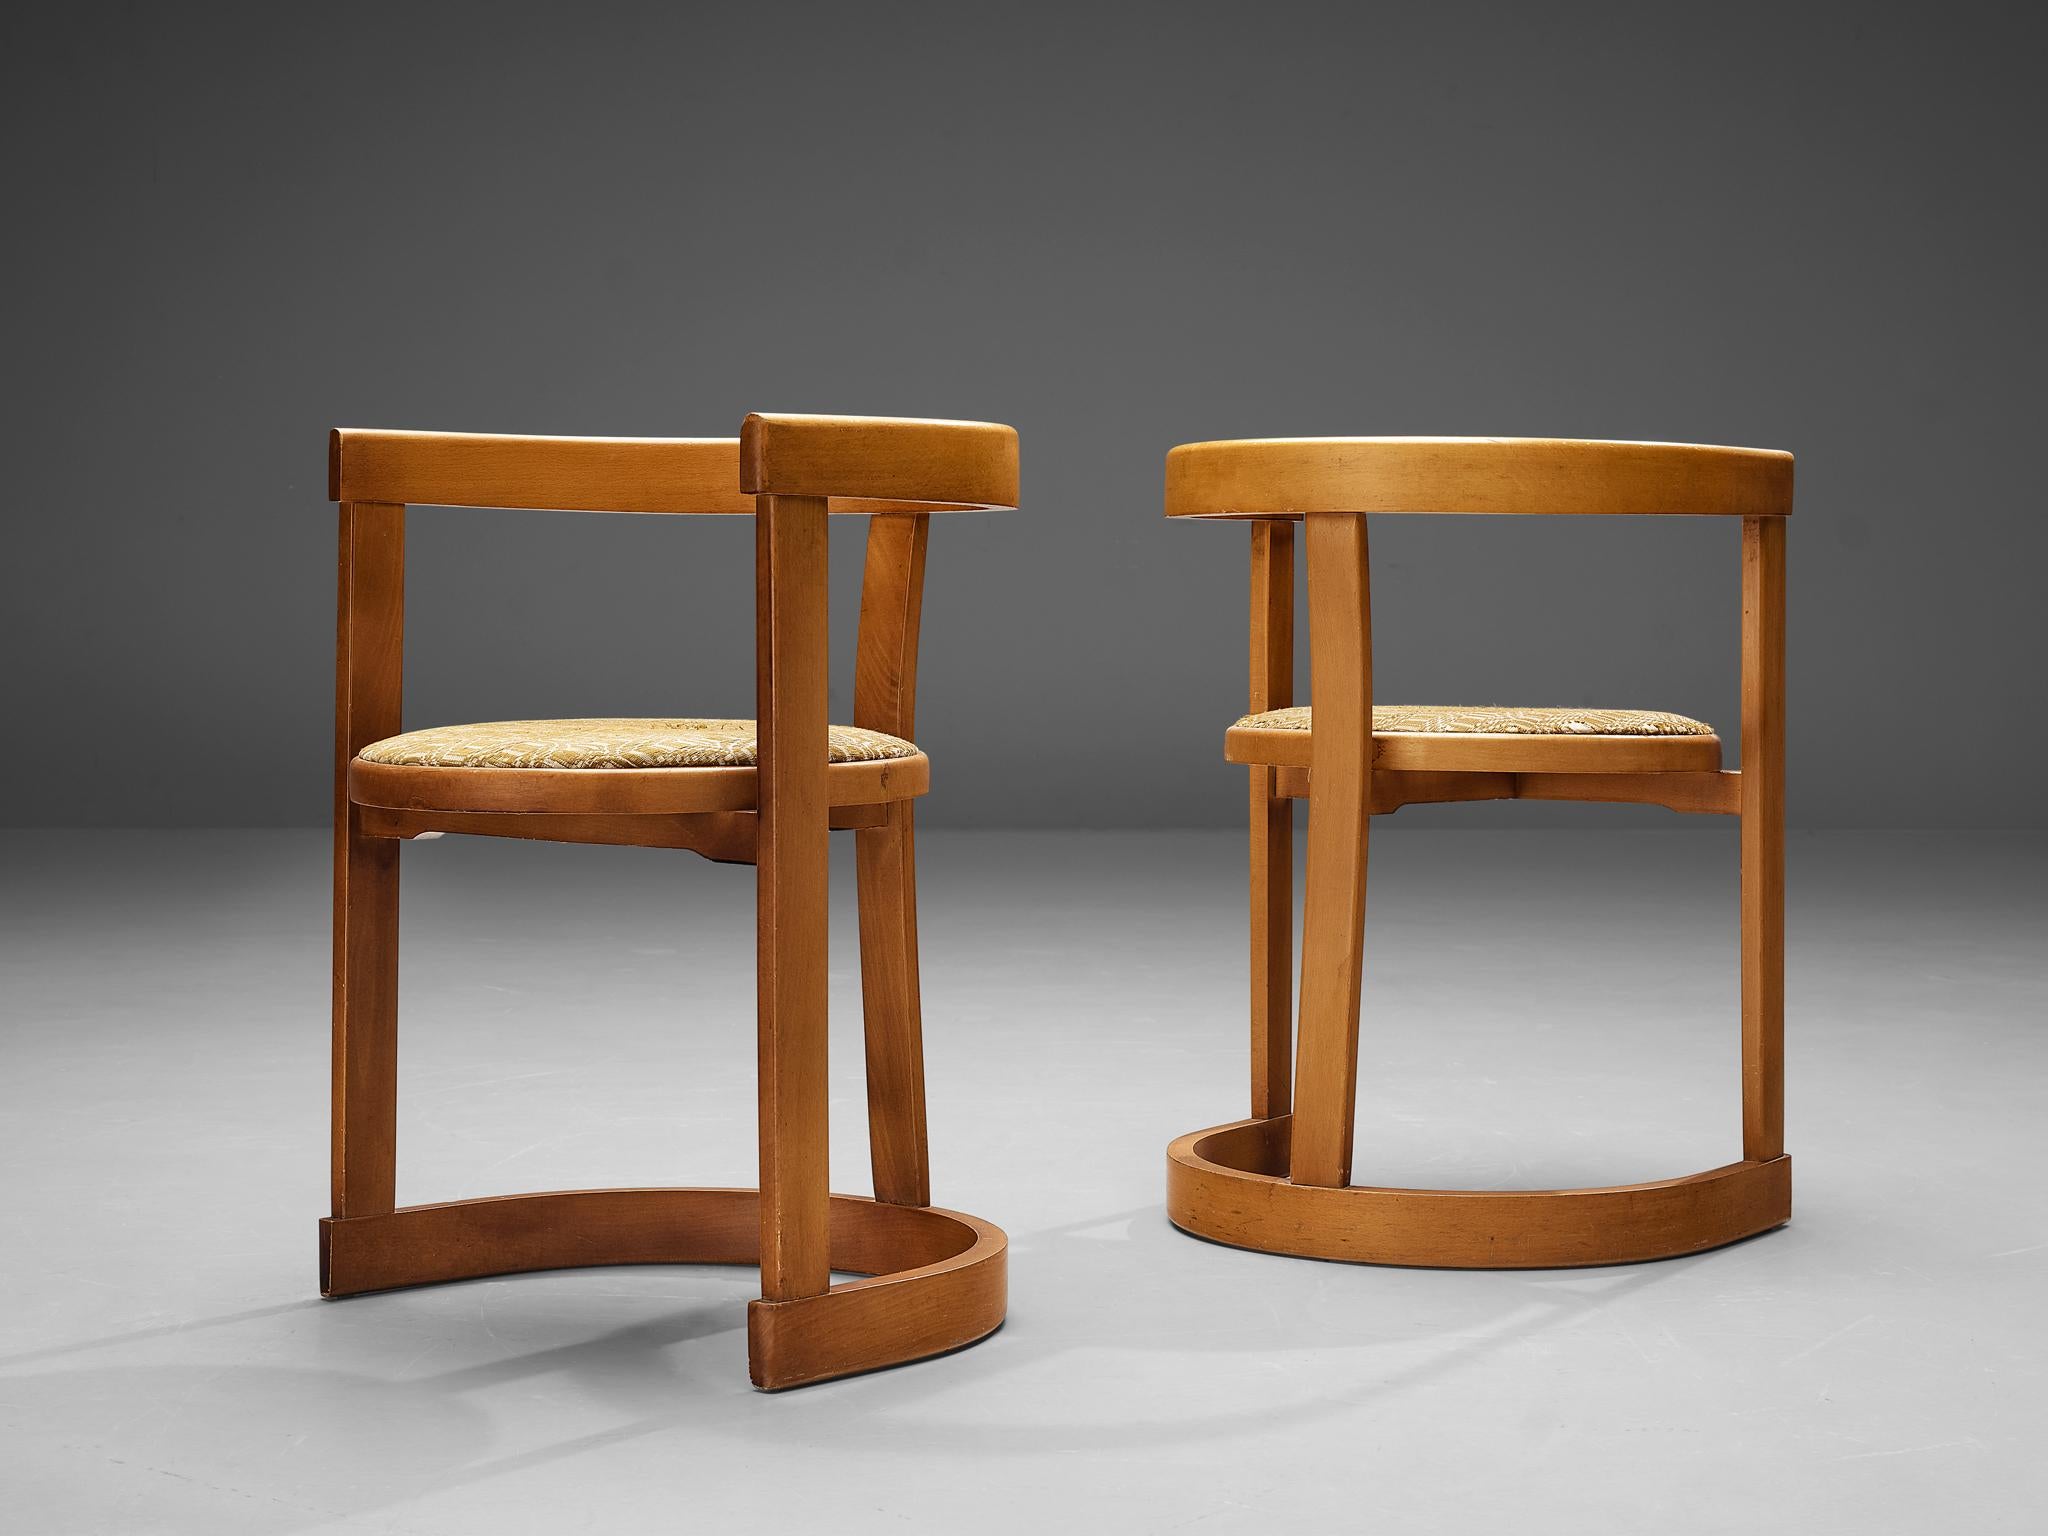 Pair of dining chairs, beech, fabric, Italy, 1960s

Everything about this pair of chairs is elegantly round. The back-/armrest echoes the base in the same semicircular, open form. Three vertical slats of which the one in the back is slightly curved